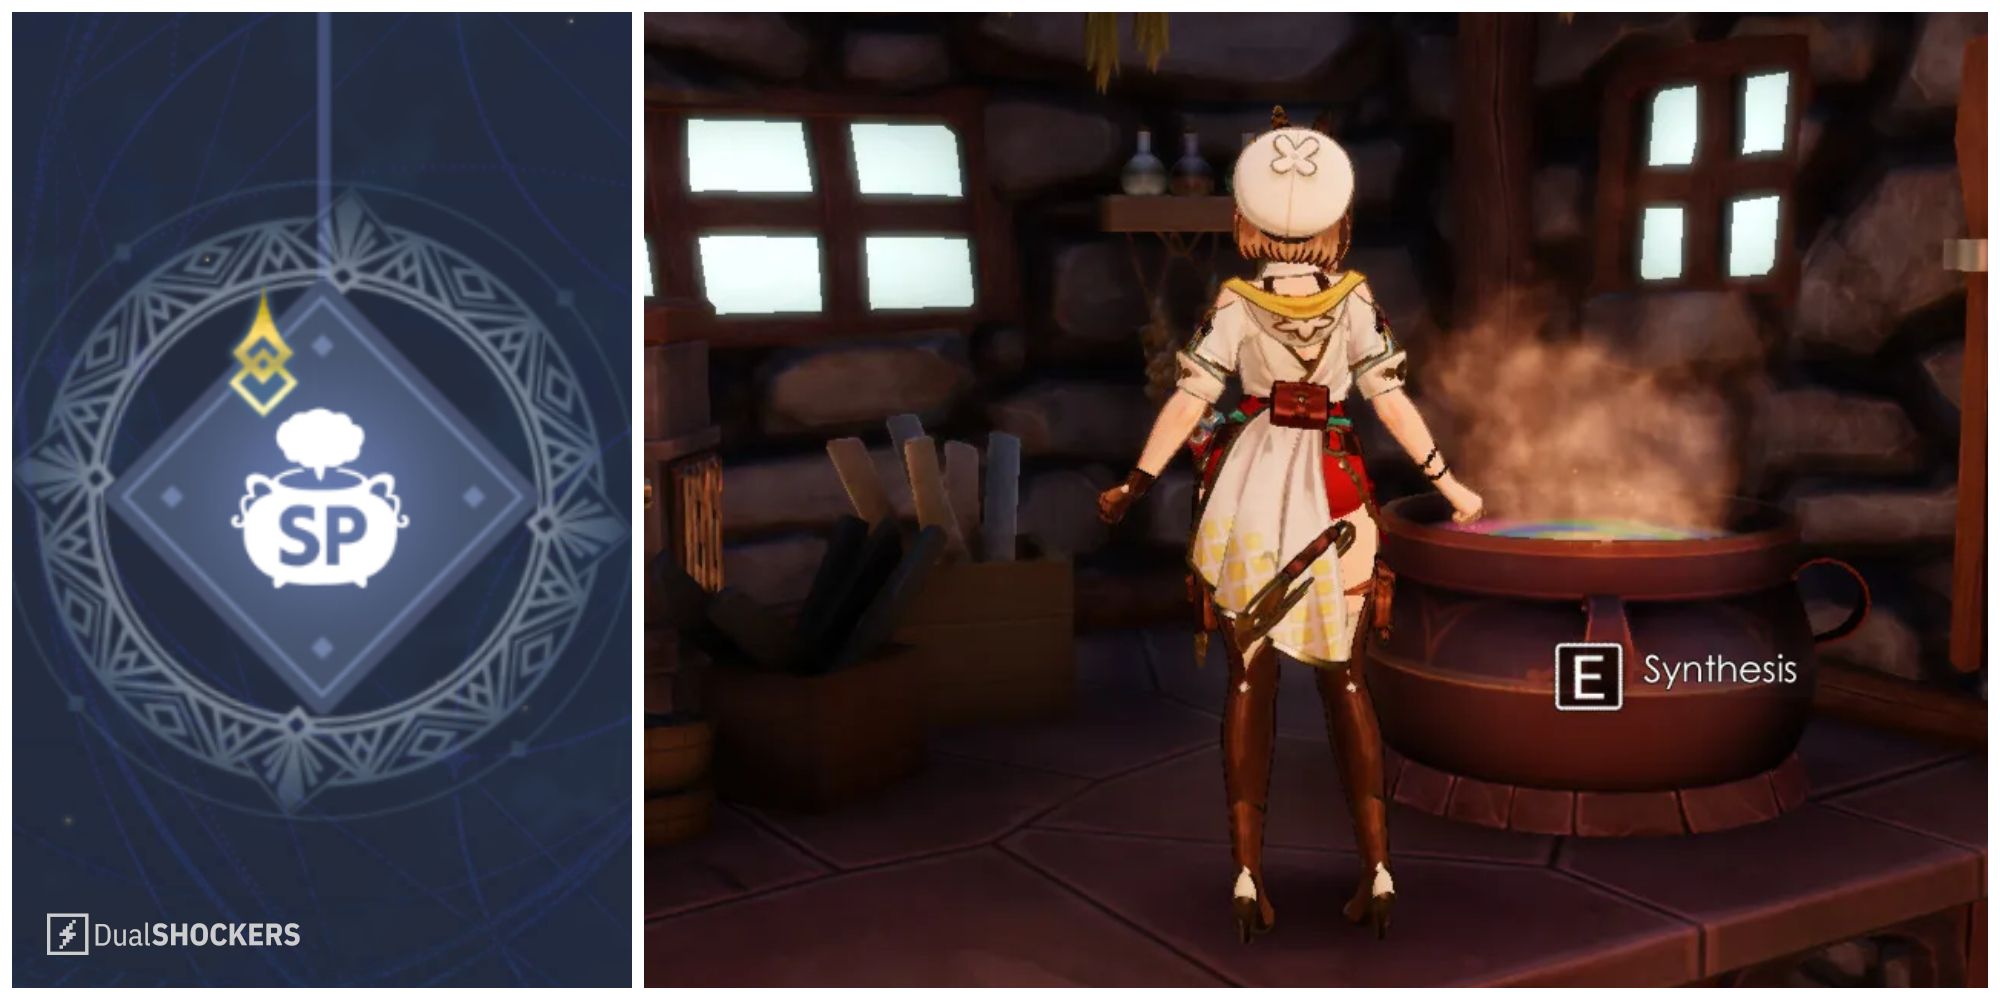 Split image of the skill point symbol and the synthesis pot in Atelier Ryza 3.